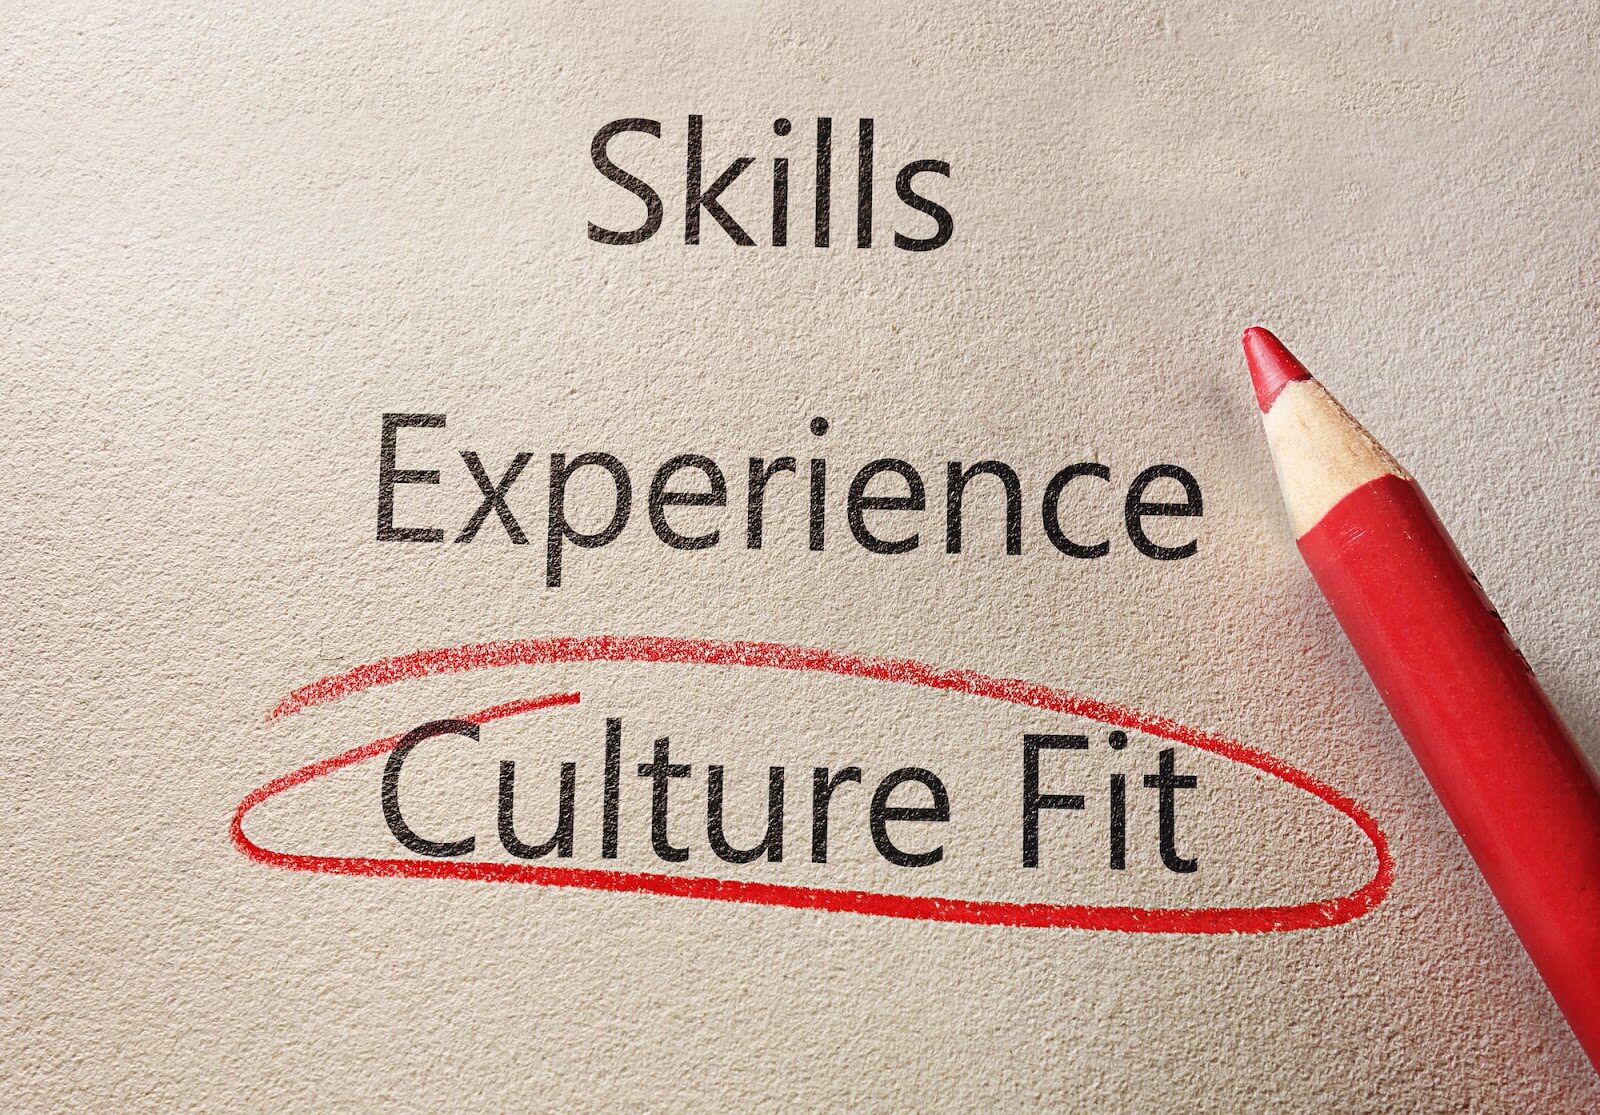 "Culture fit" circled in a job application